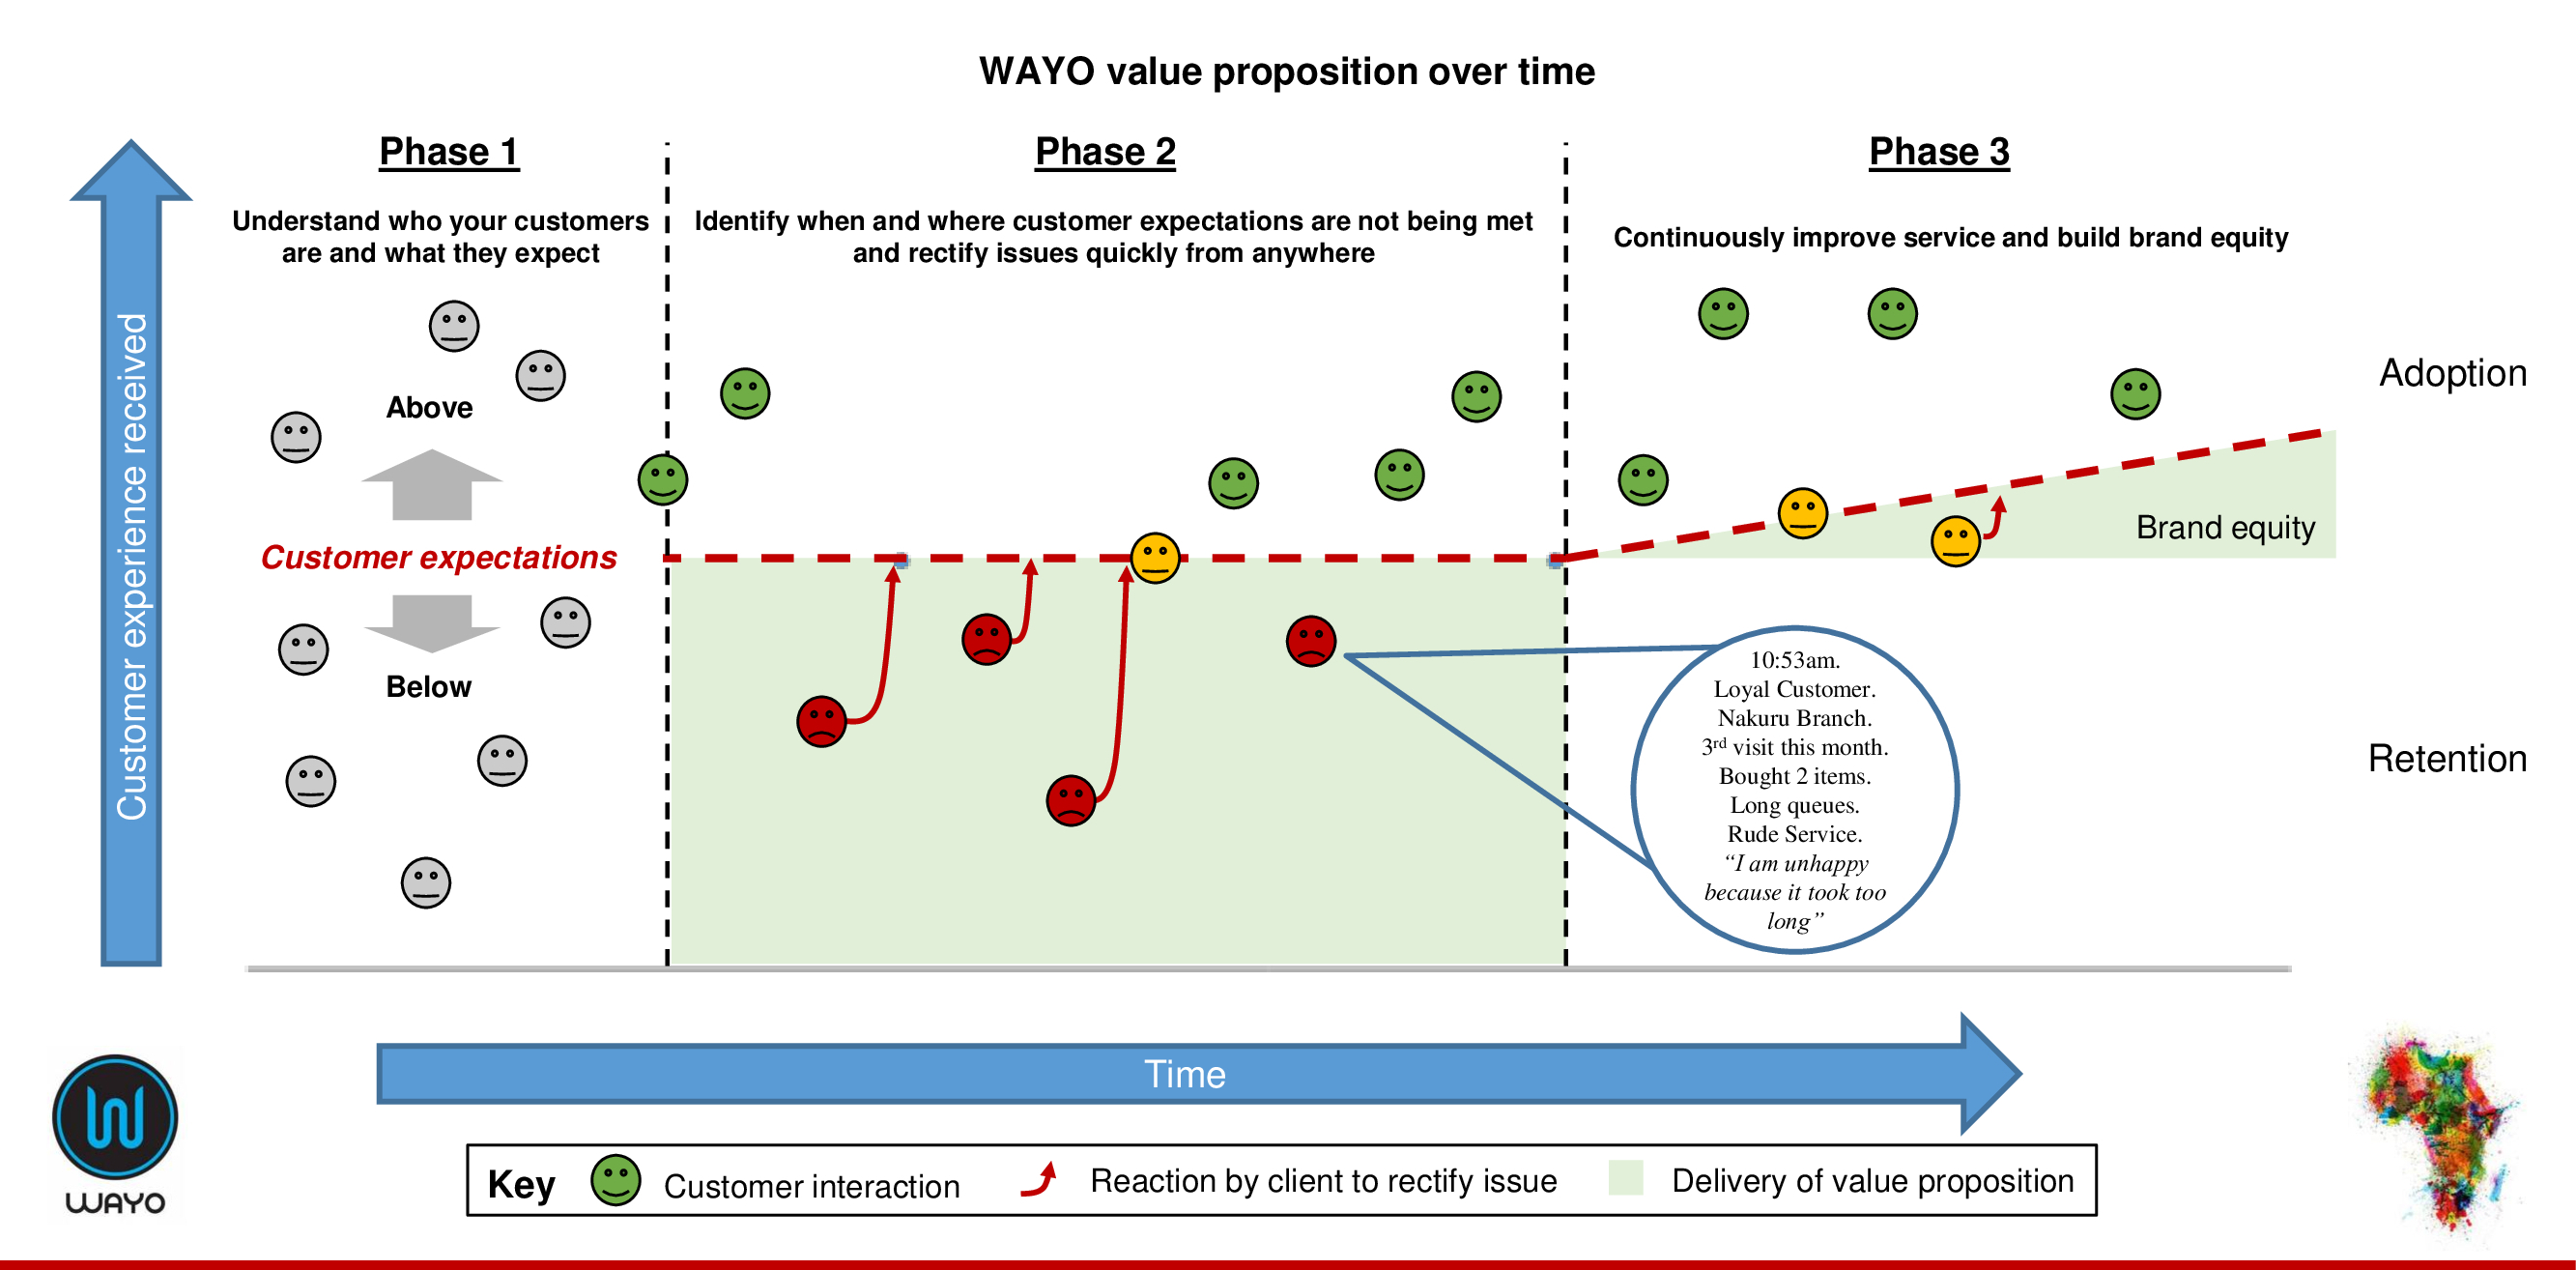 WAYO Value Proposition over time